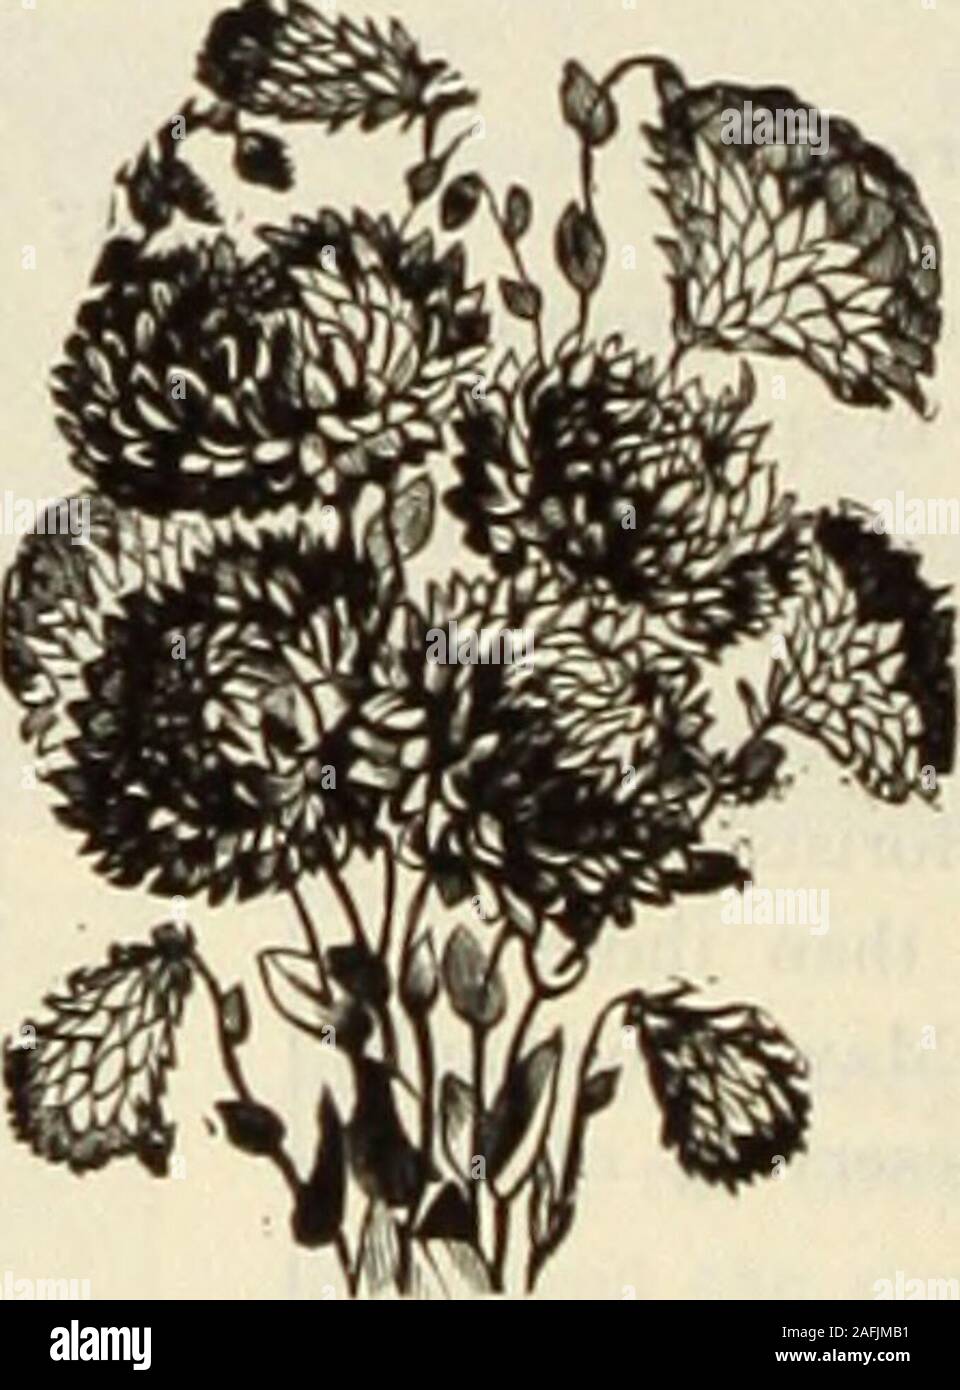 . Dreer's garden book 1915. r T^r, 7/w ffm.  &gt;^. J^^. Rhodanthe. RiciNUS Zanzibariknsis (Castor Oil Bean). RICINUS (Castor Oil Bean) Ornamental plants of stately growth and picturesquefoliage, with Urilliant colored fruit, producing sub tropi-cal effect; fine for lawns, massing or centre plants forbeds. PER PKT. 3861 Borboniensis. Green foliage; 1.) feet. Peroz., 15 cts 5 3863 Gibsonl. Deep red foliage; 5 feet. Per oz., lo cts 5 3862 Cambodgiensis. The main stem and leafstalks are shining ebony, leaves large, regularlydivided and richly colored. The foliage assumes different shades as the Stock Photo